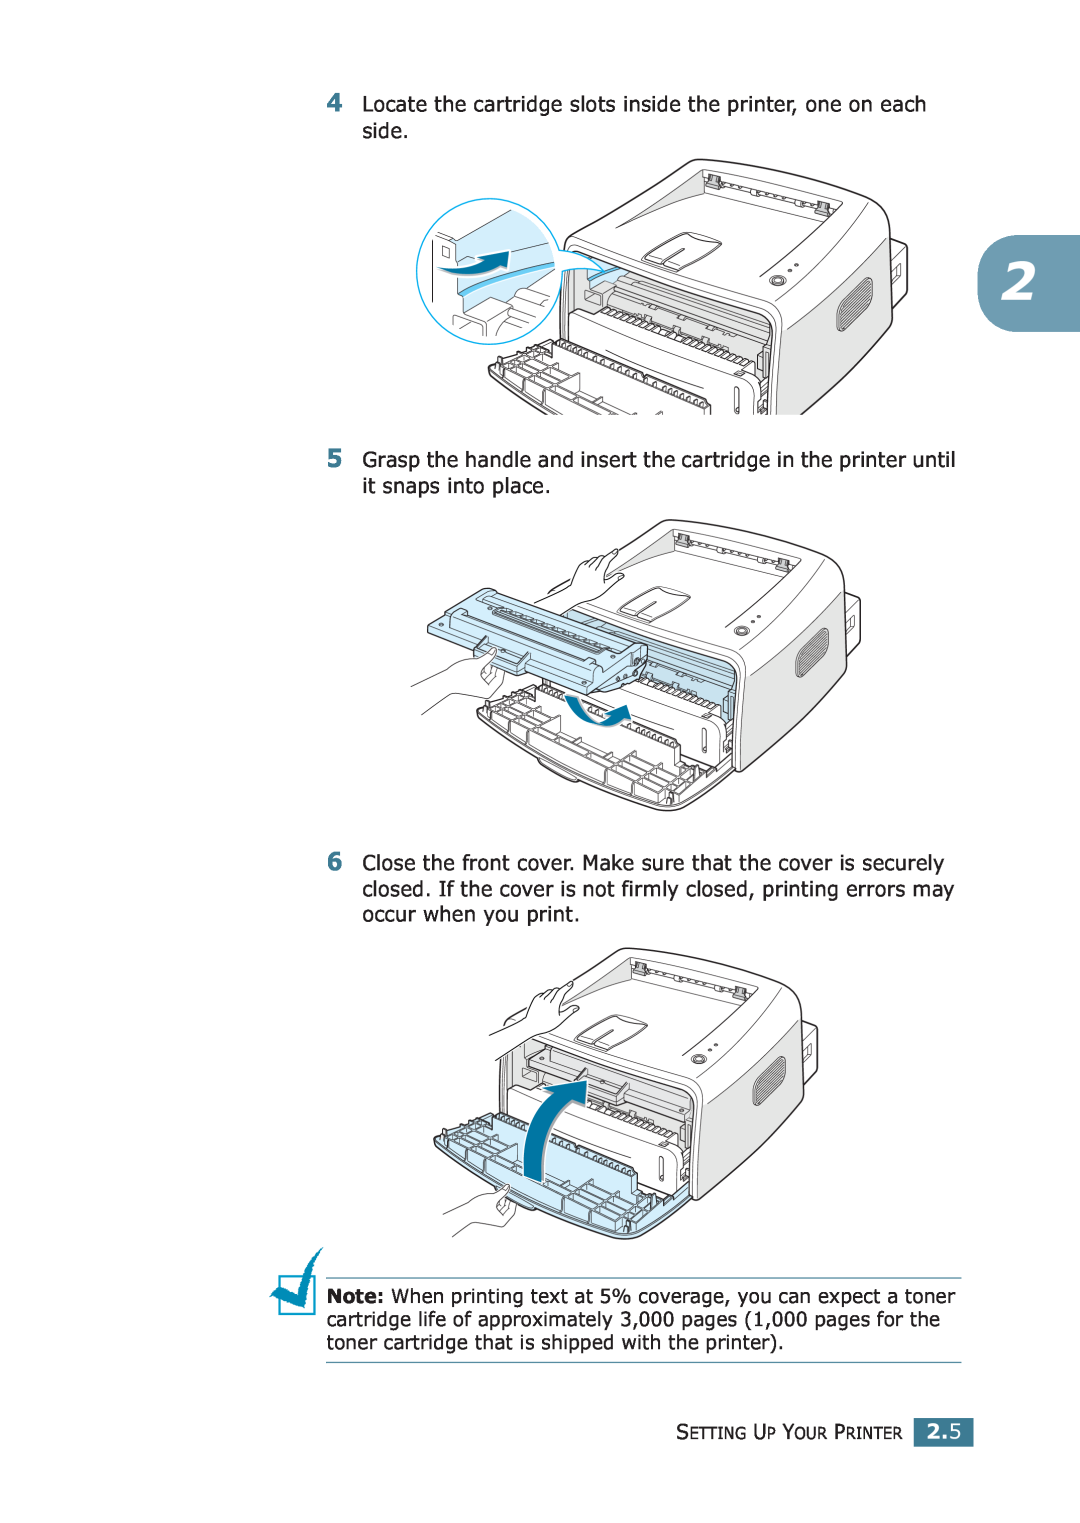 Samsung ML-1710P manual Locate the cartridge slots inside the printer, one on each side 